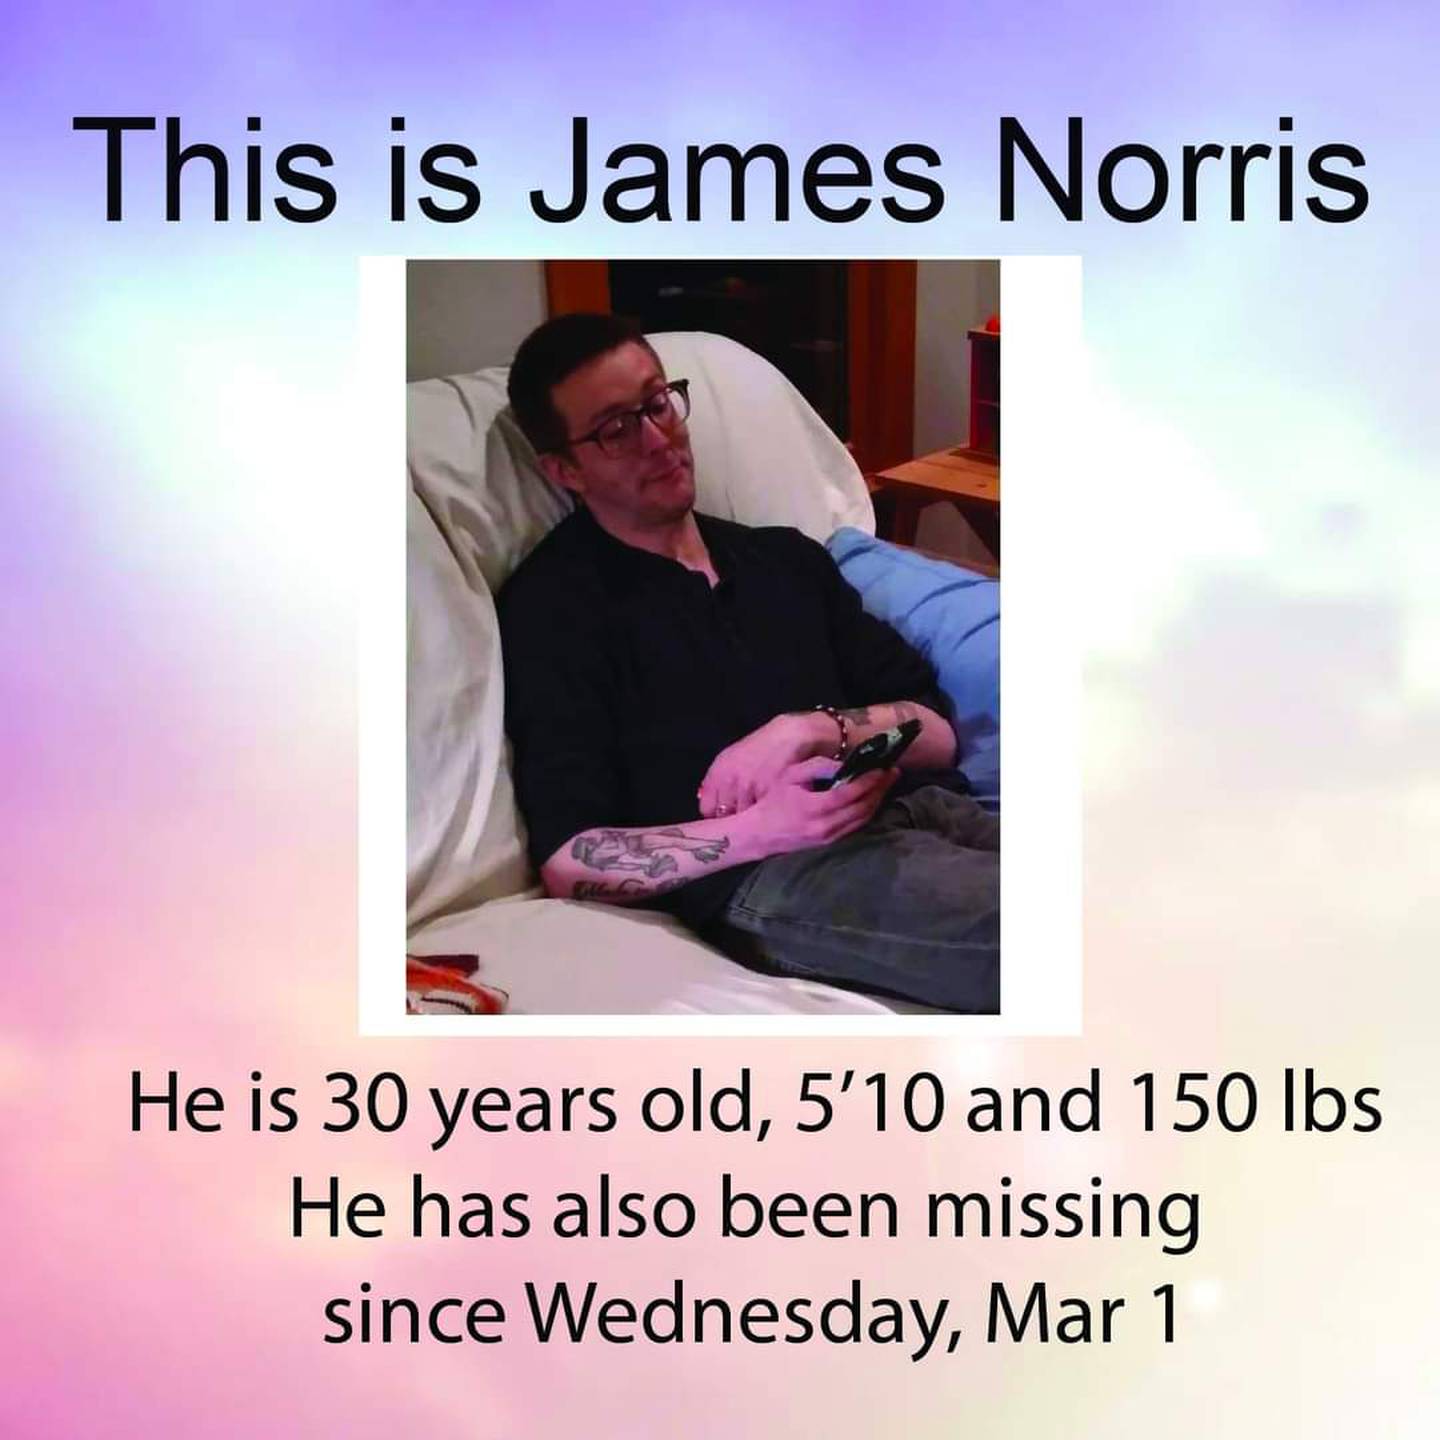 James Norris of Virgil has been missing since March 1 and was last known to be on the Great Western Trail. Anyone with information on James Norris’s whereabouts is asked to call the Kane County Sheriff’s Office Investigations Division at 630-444-1103.